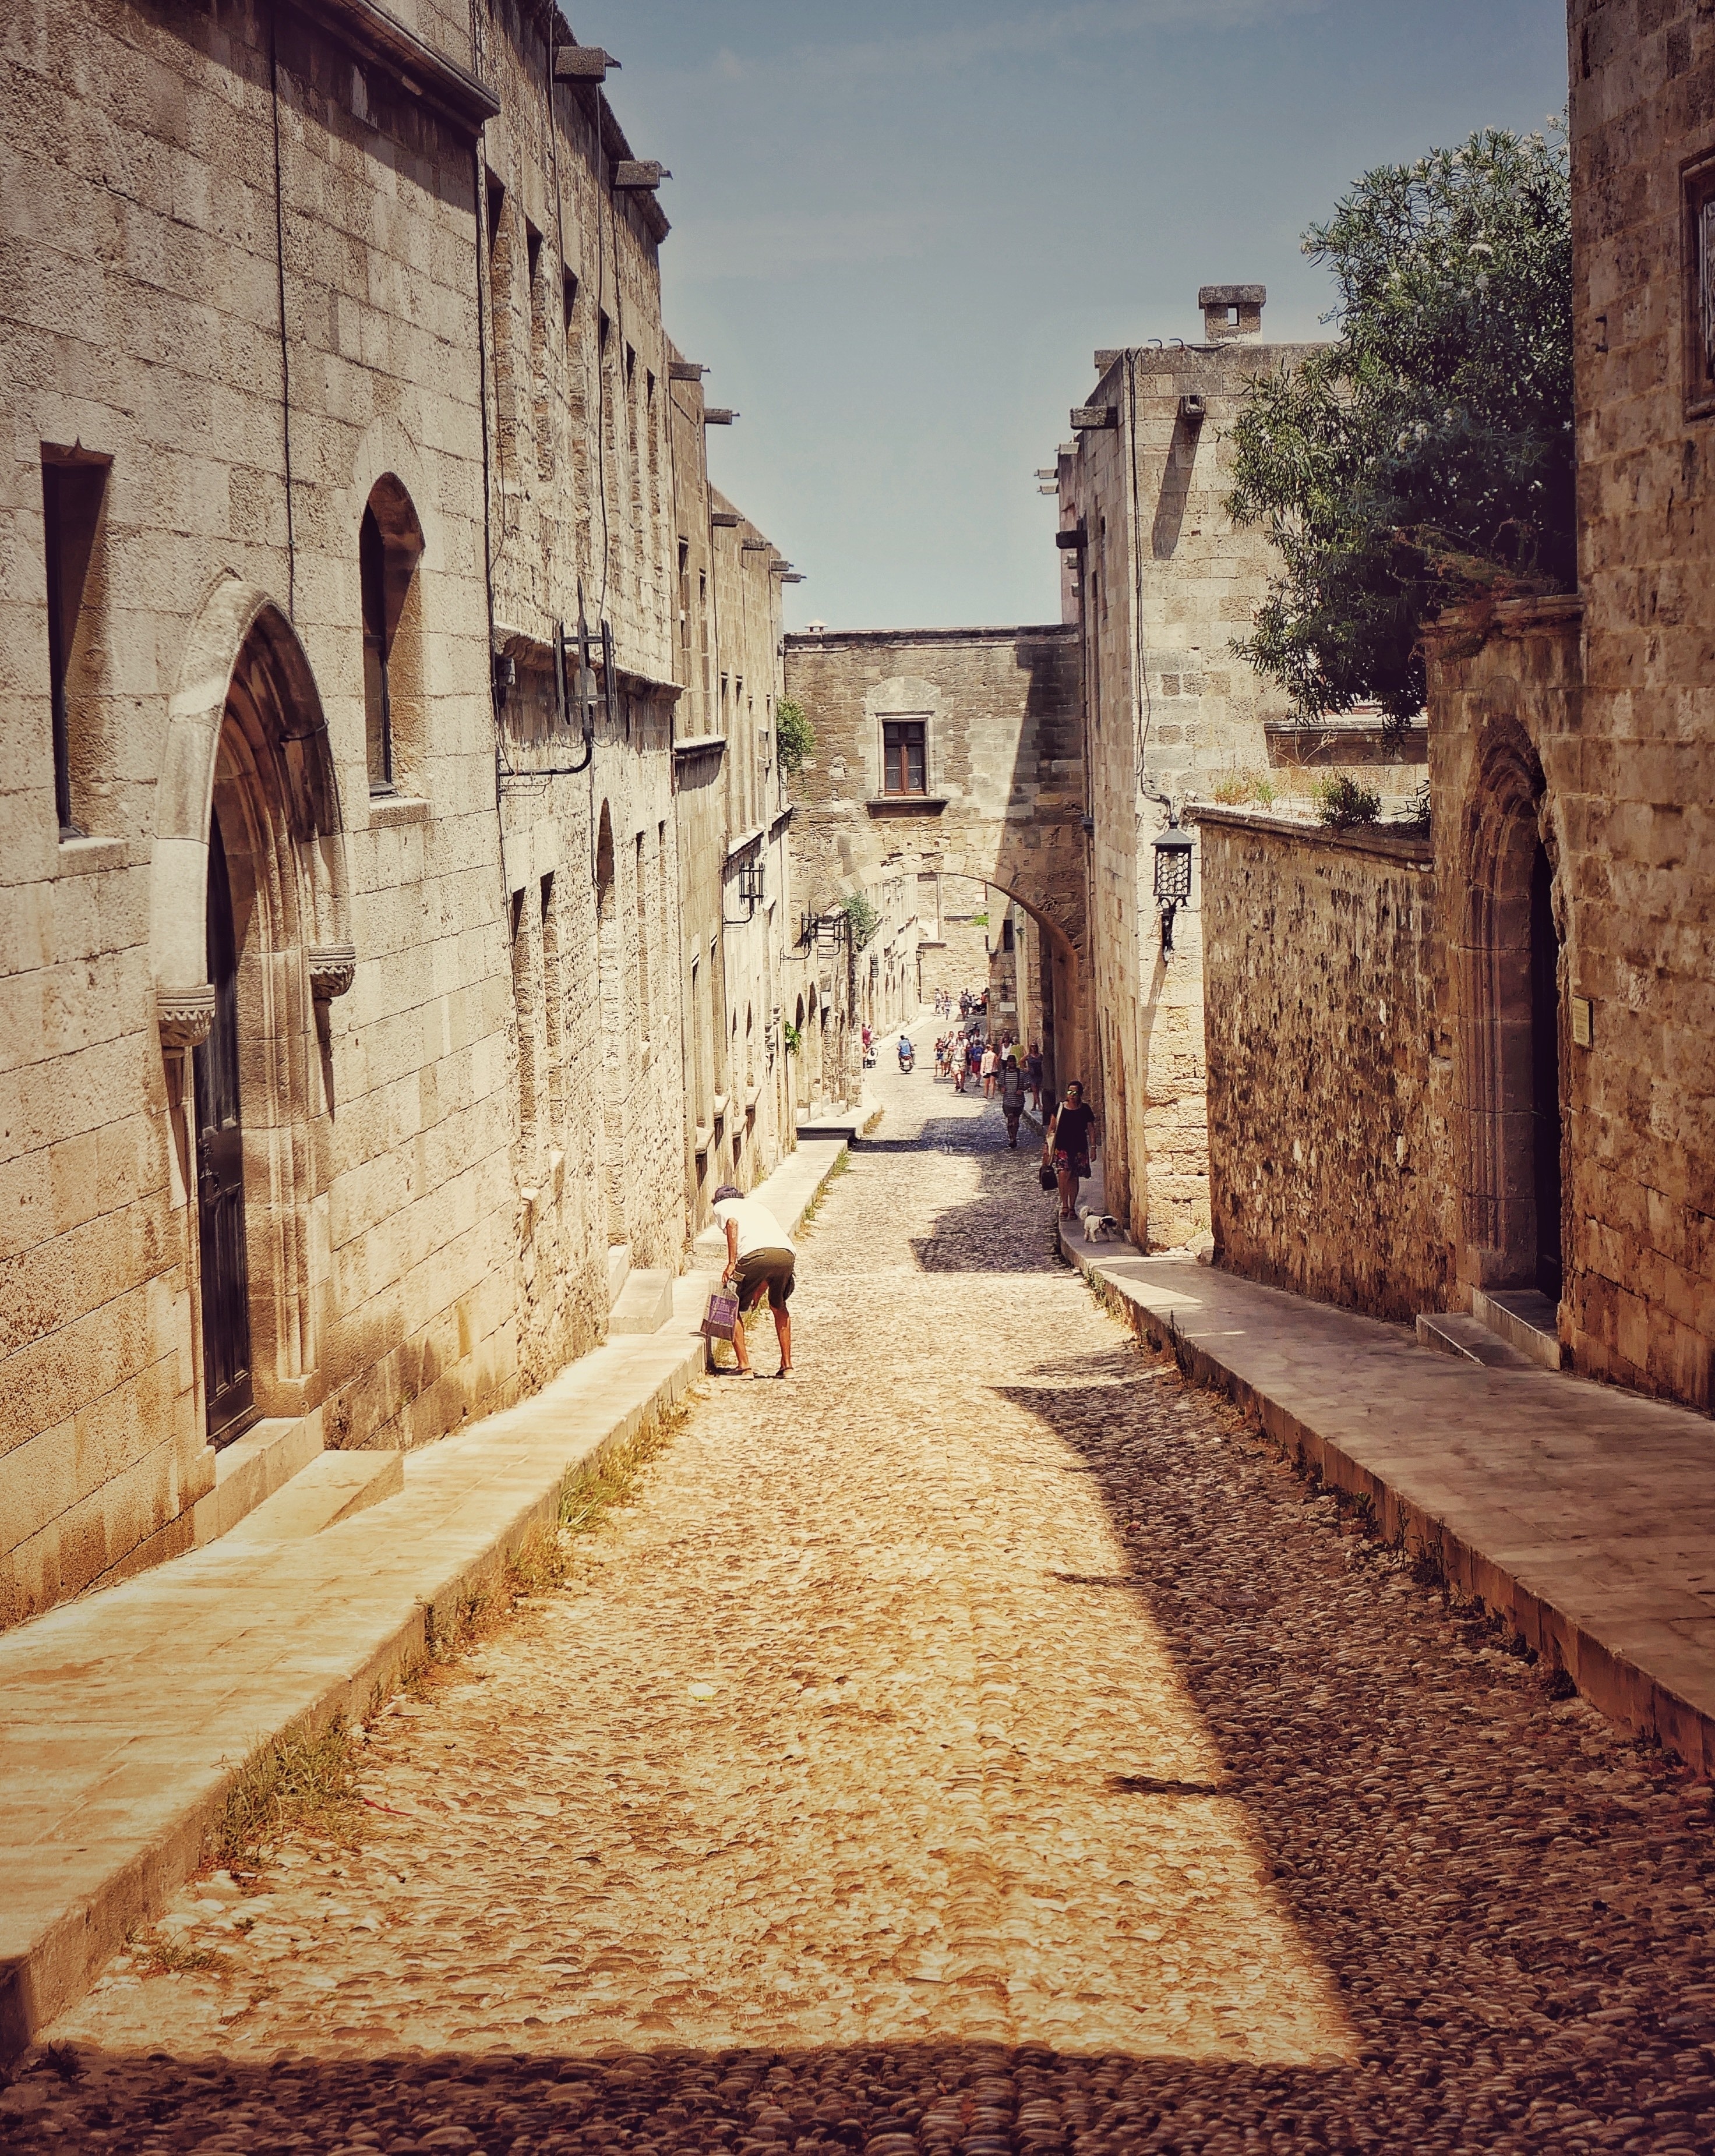 Here you can see the famous knight street in mid-century Rhodes.  This well-preserved city is now in the middle of modern Rhodes.  Completely walled with alleys so you sometimes lose your way.  Nice cafes, shops etc. Well worth a visit.  #greece #rhodos #medieval #authentic #eiland #travel #discover #beautiful